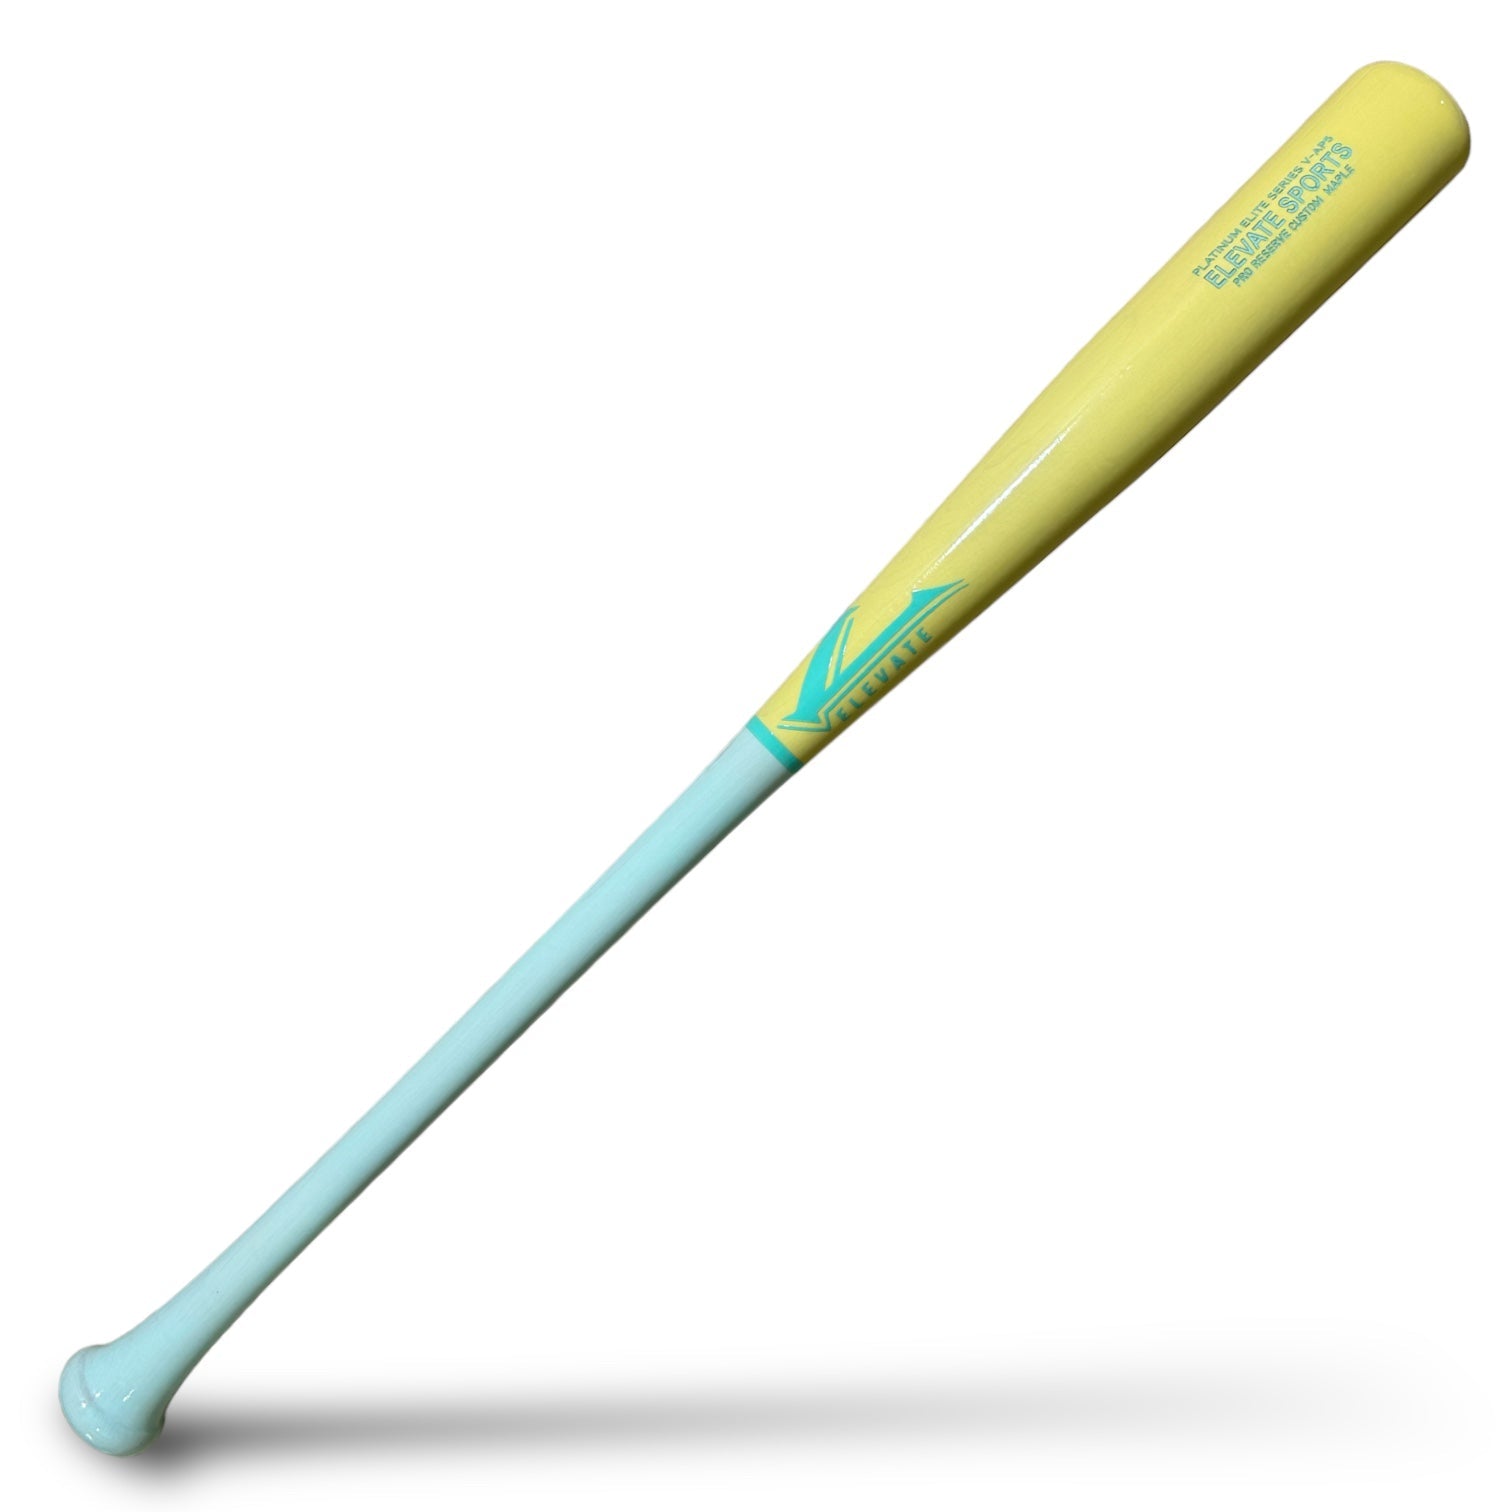 Easter Collection stock bat - yellow and blue